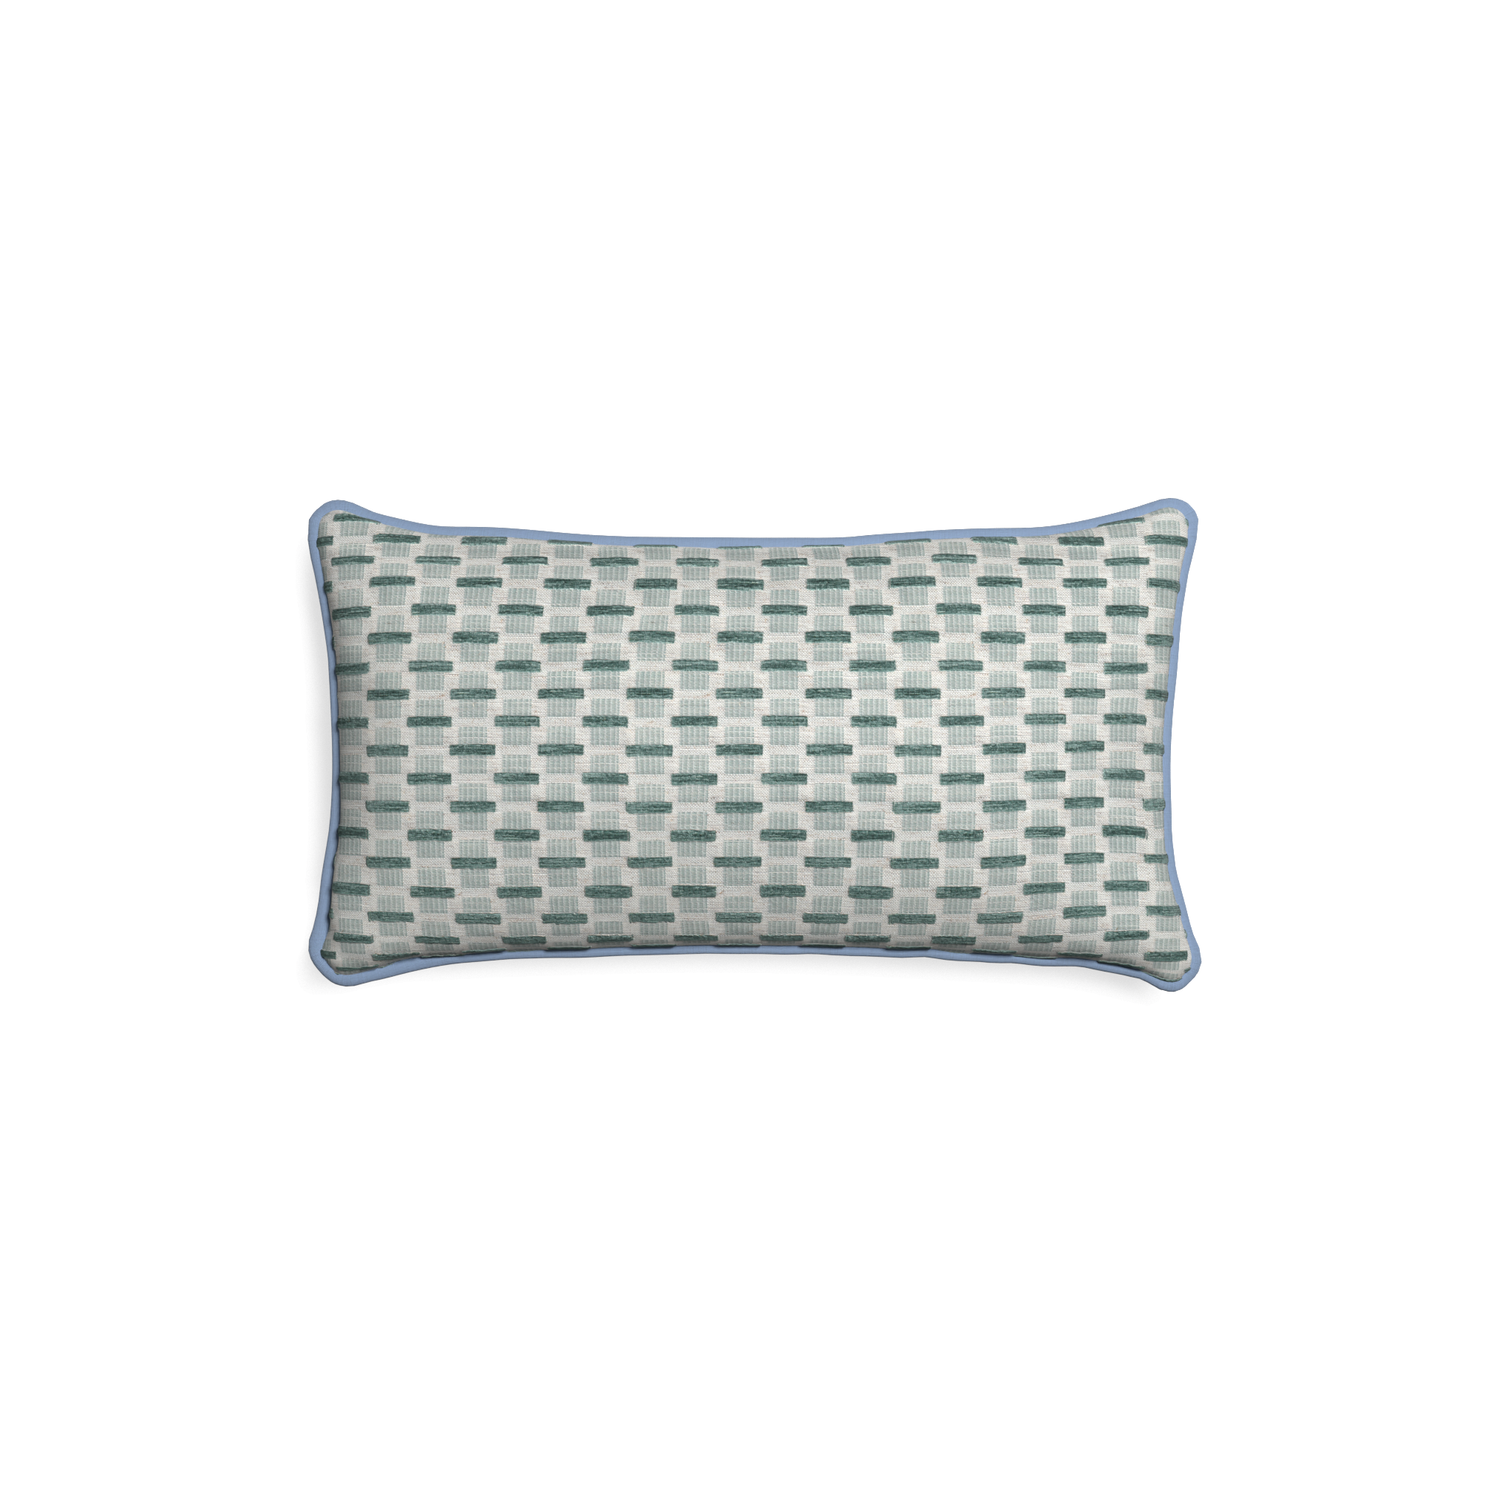 Petite-lumbar willow mint custom green geometric chenillepillow with sky piping on white background